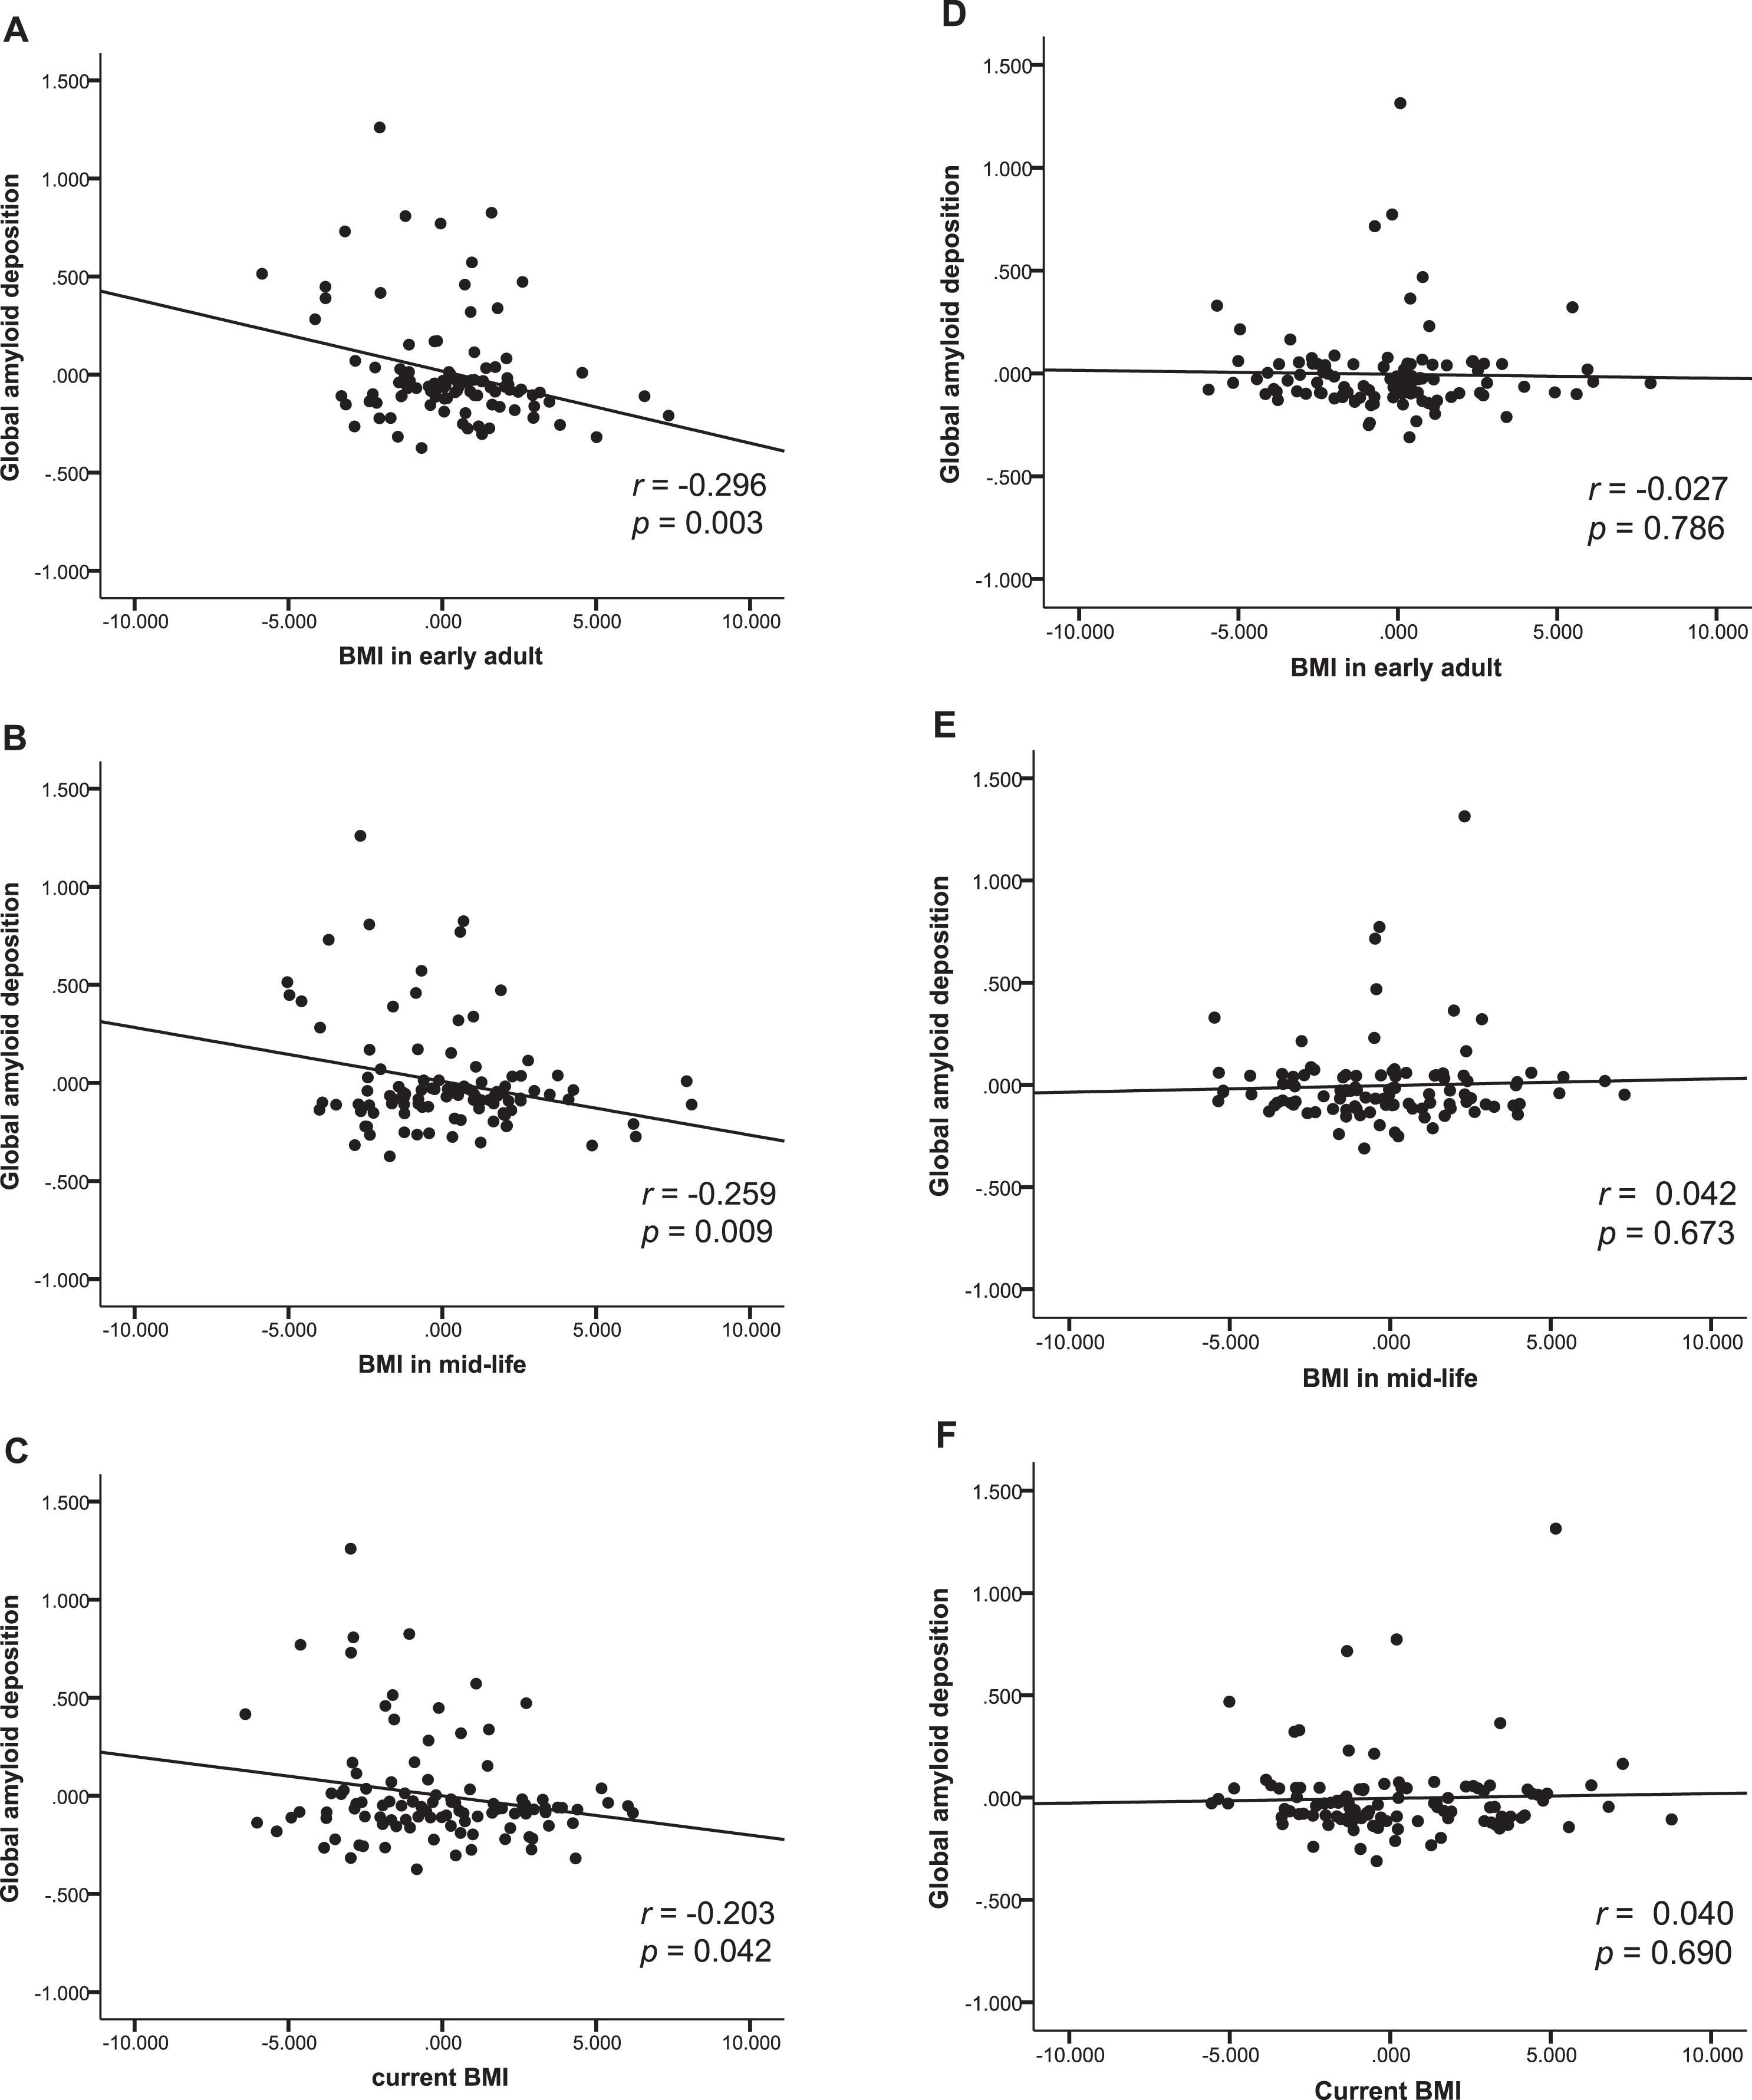 Body mass index and amyloid beta deposition. Partial regression plot showing relationships between past and current BMIs and amyloid-β deposition after adjusting for covariates in males (A, B, C), and female (D, E, F).